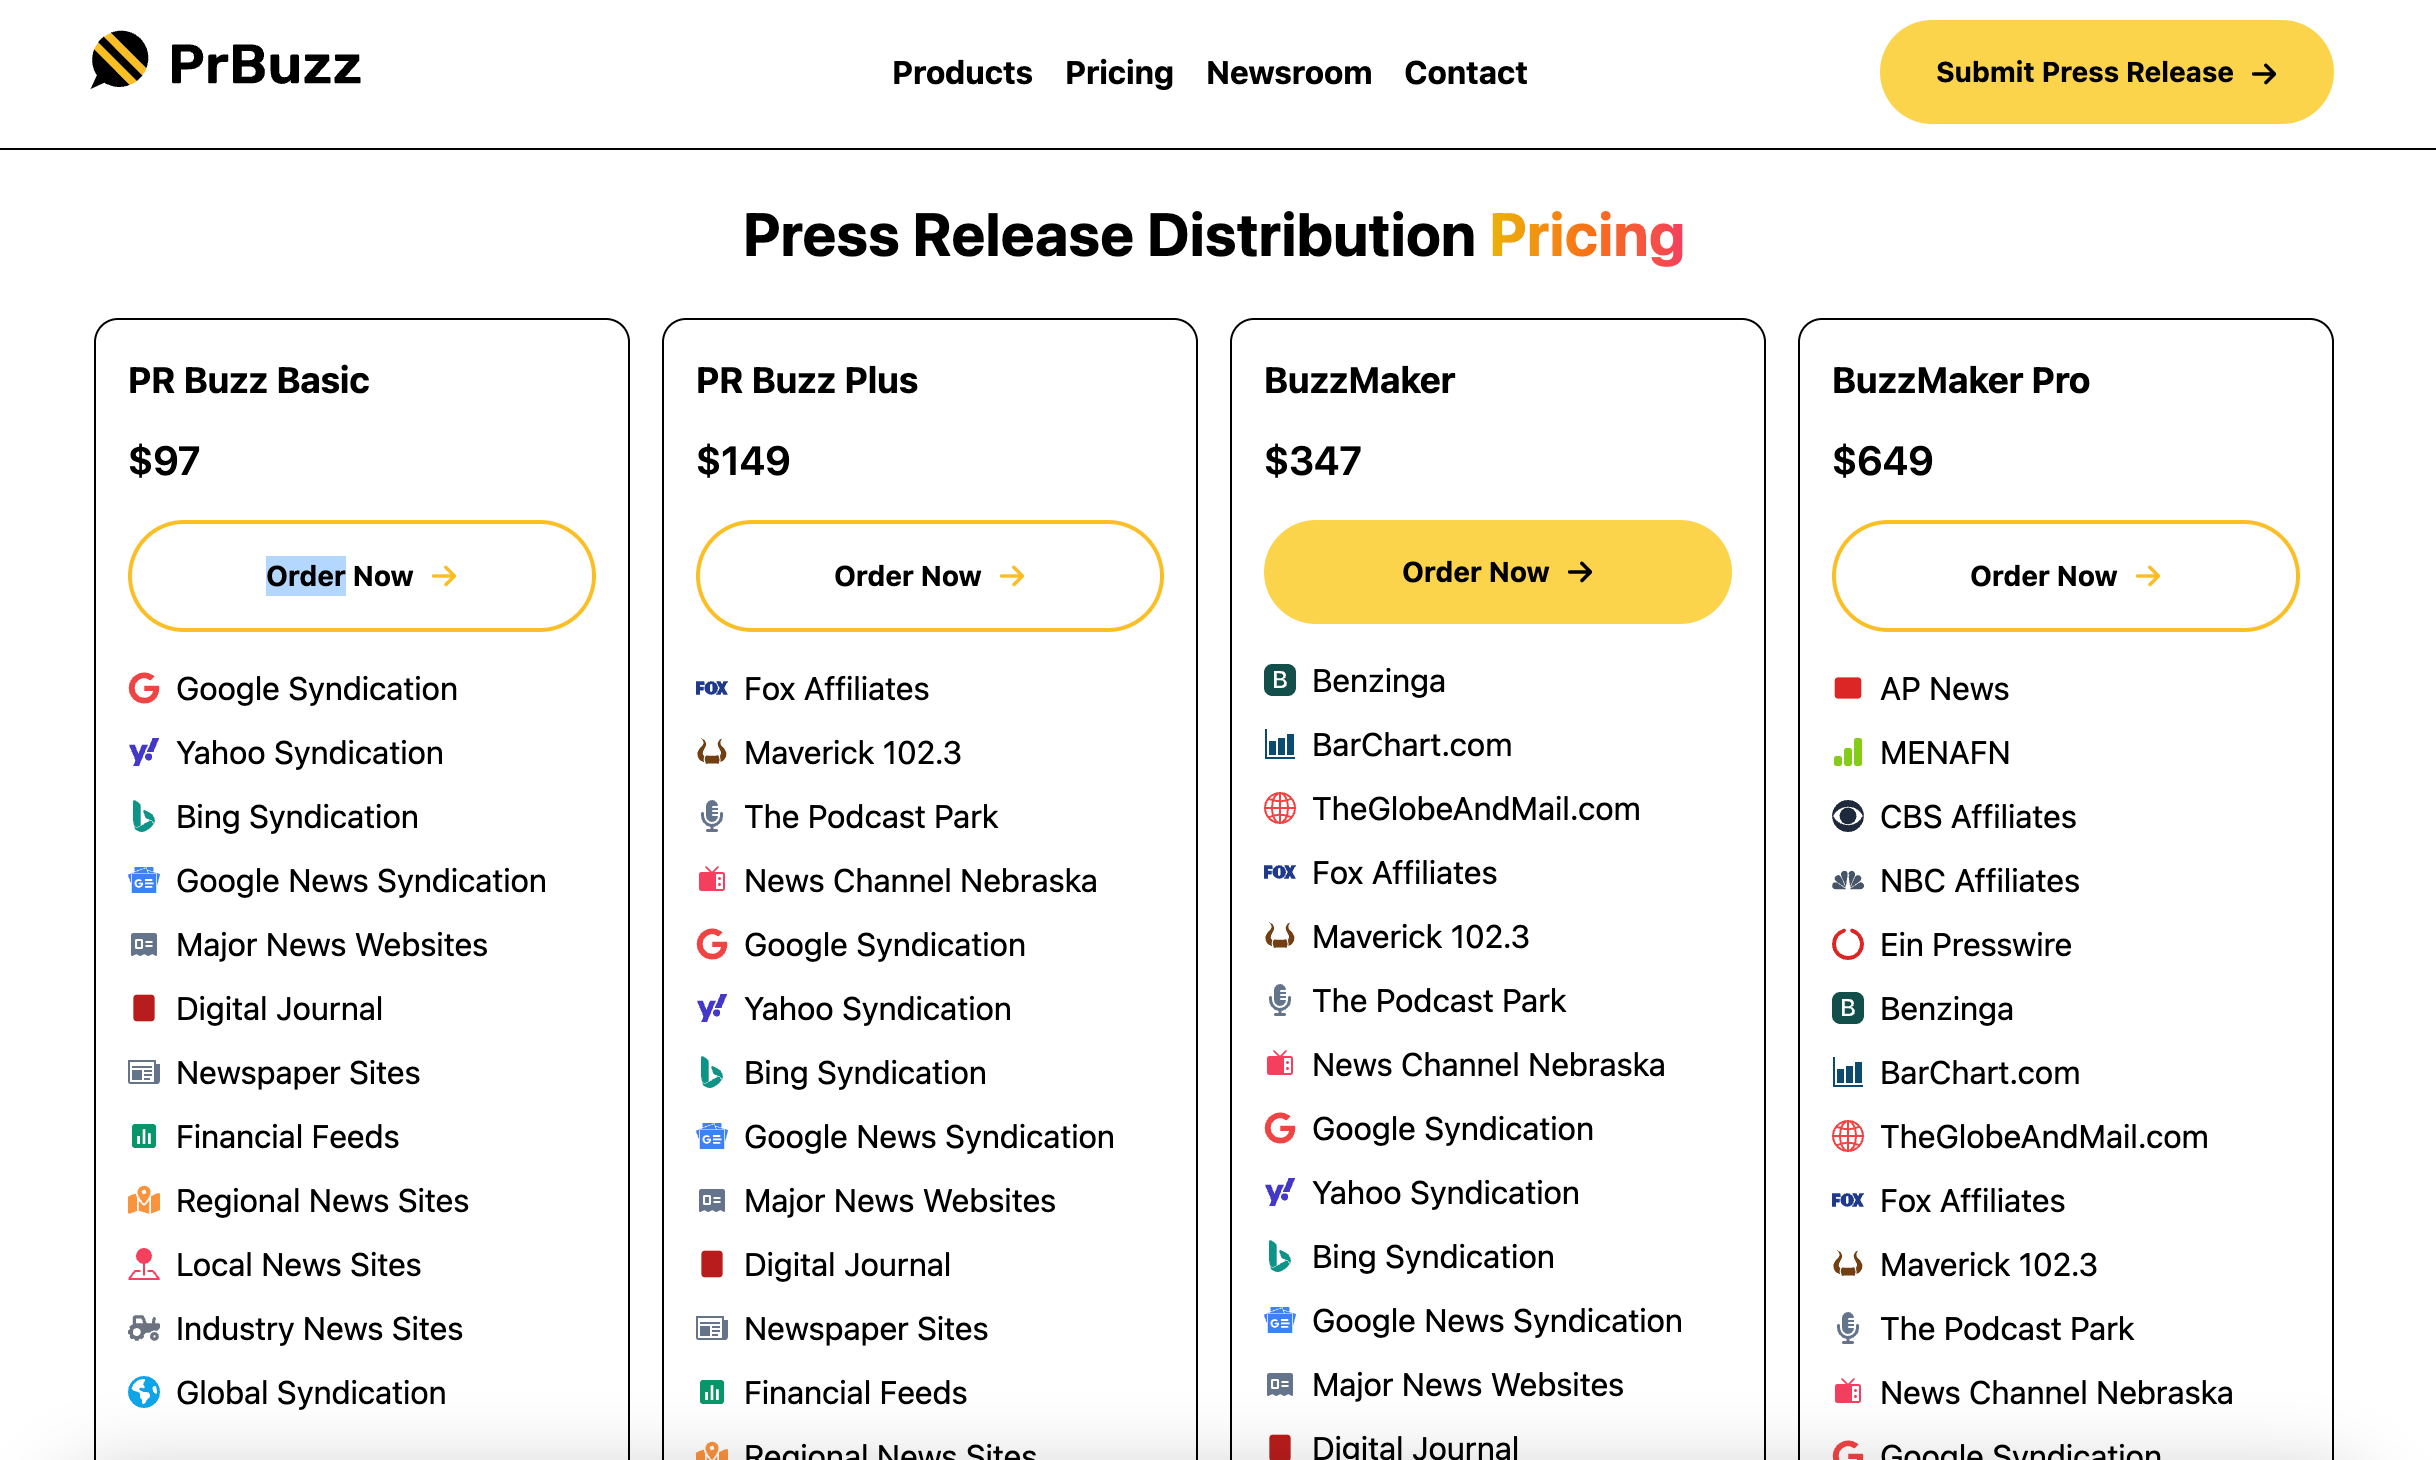 Press Release Distribution Pricing